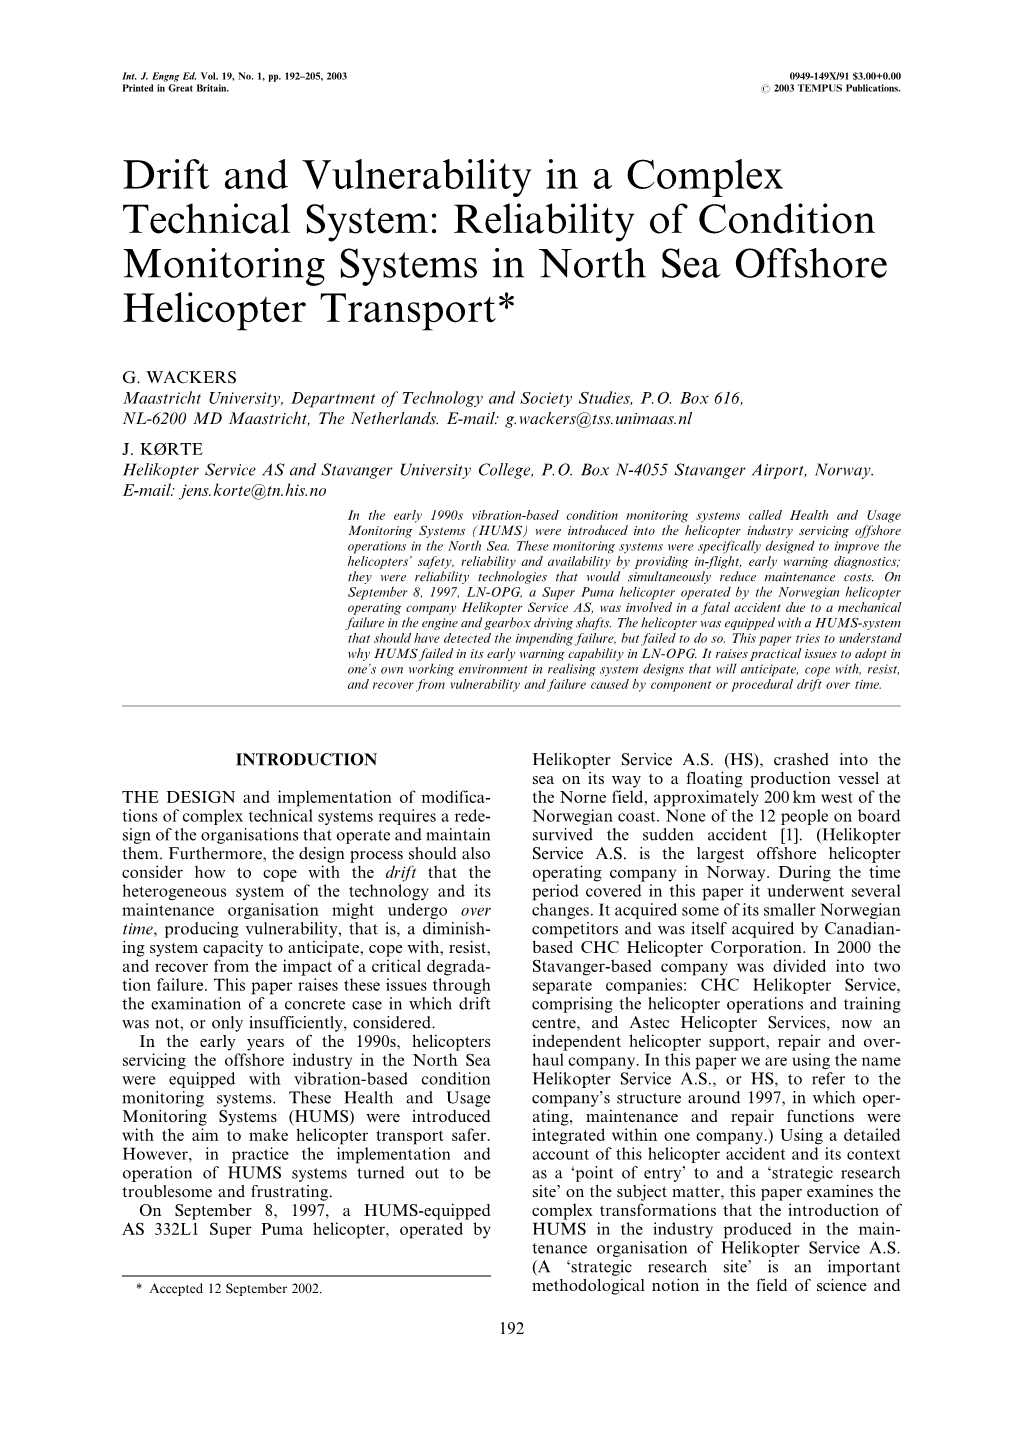 Drift and Vulnerability in a Complex Technical System: Reliability of Condition Monitoring Systems in North Sea Offshore Helicopter Transport*